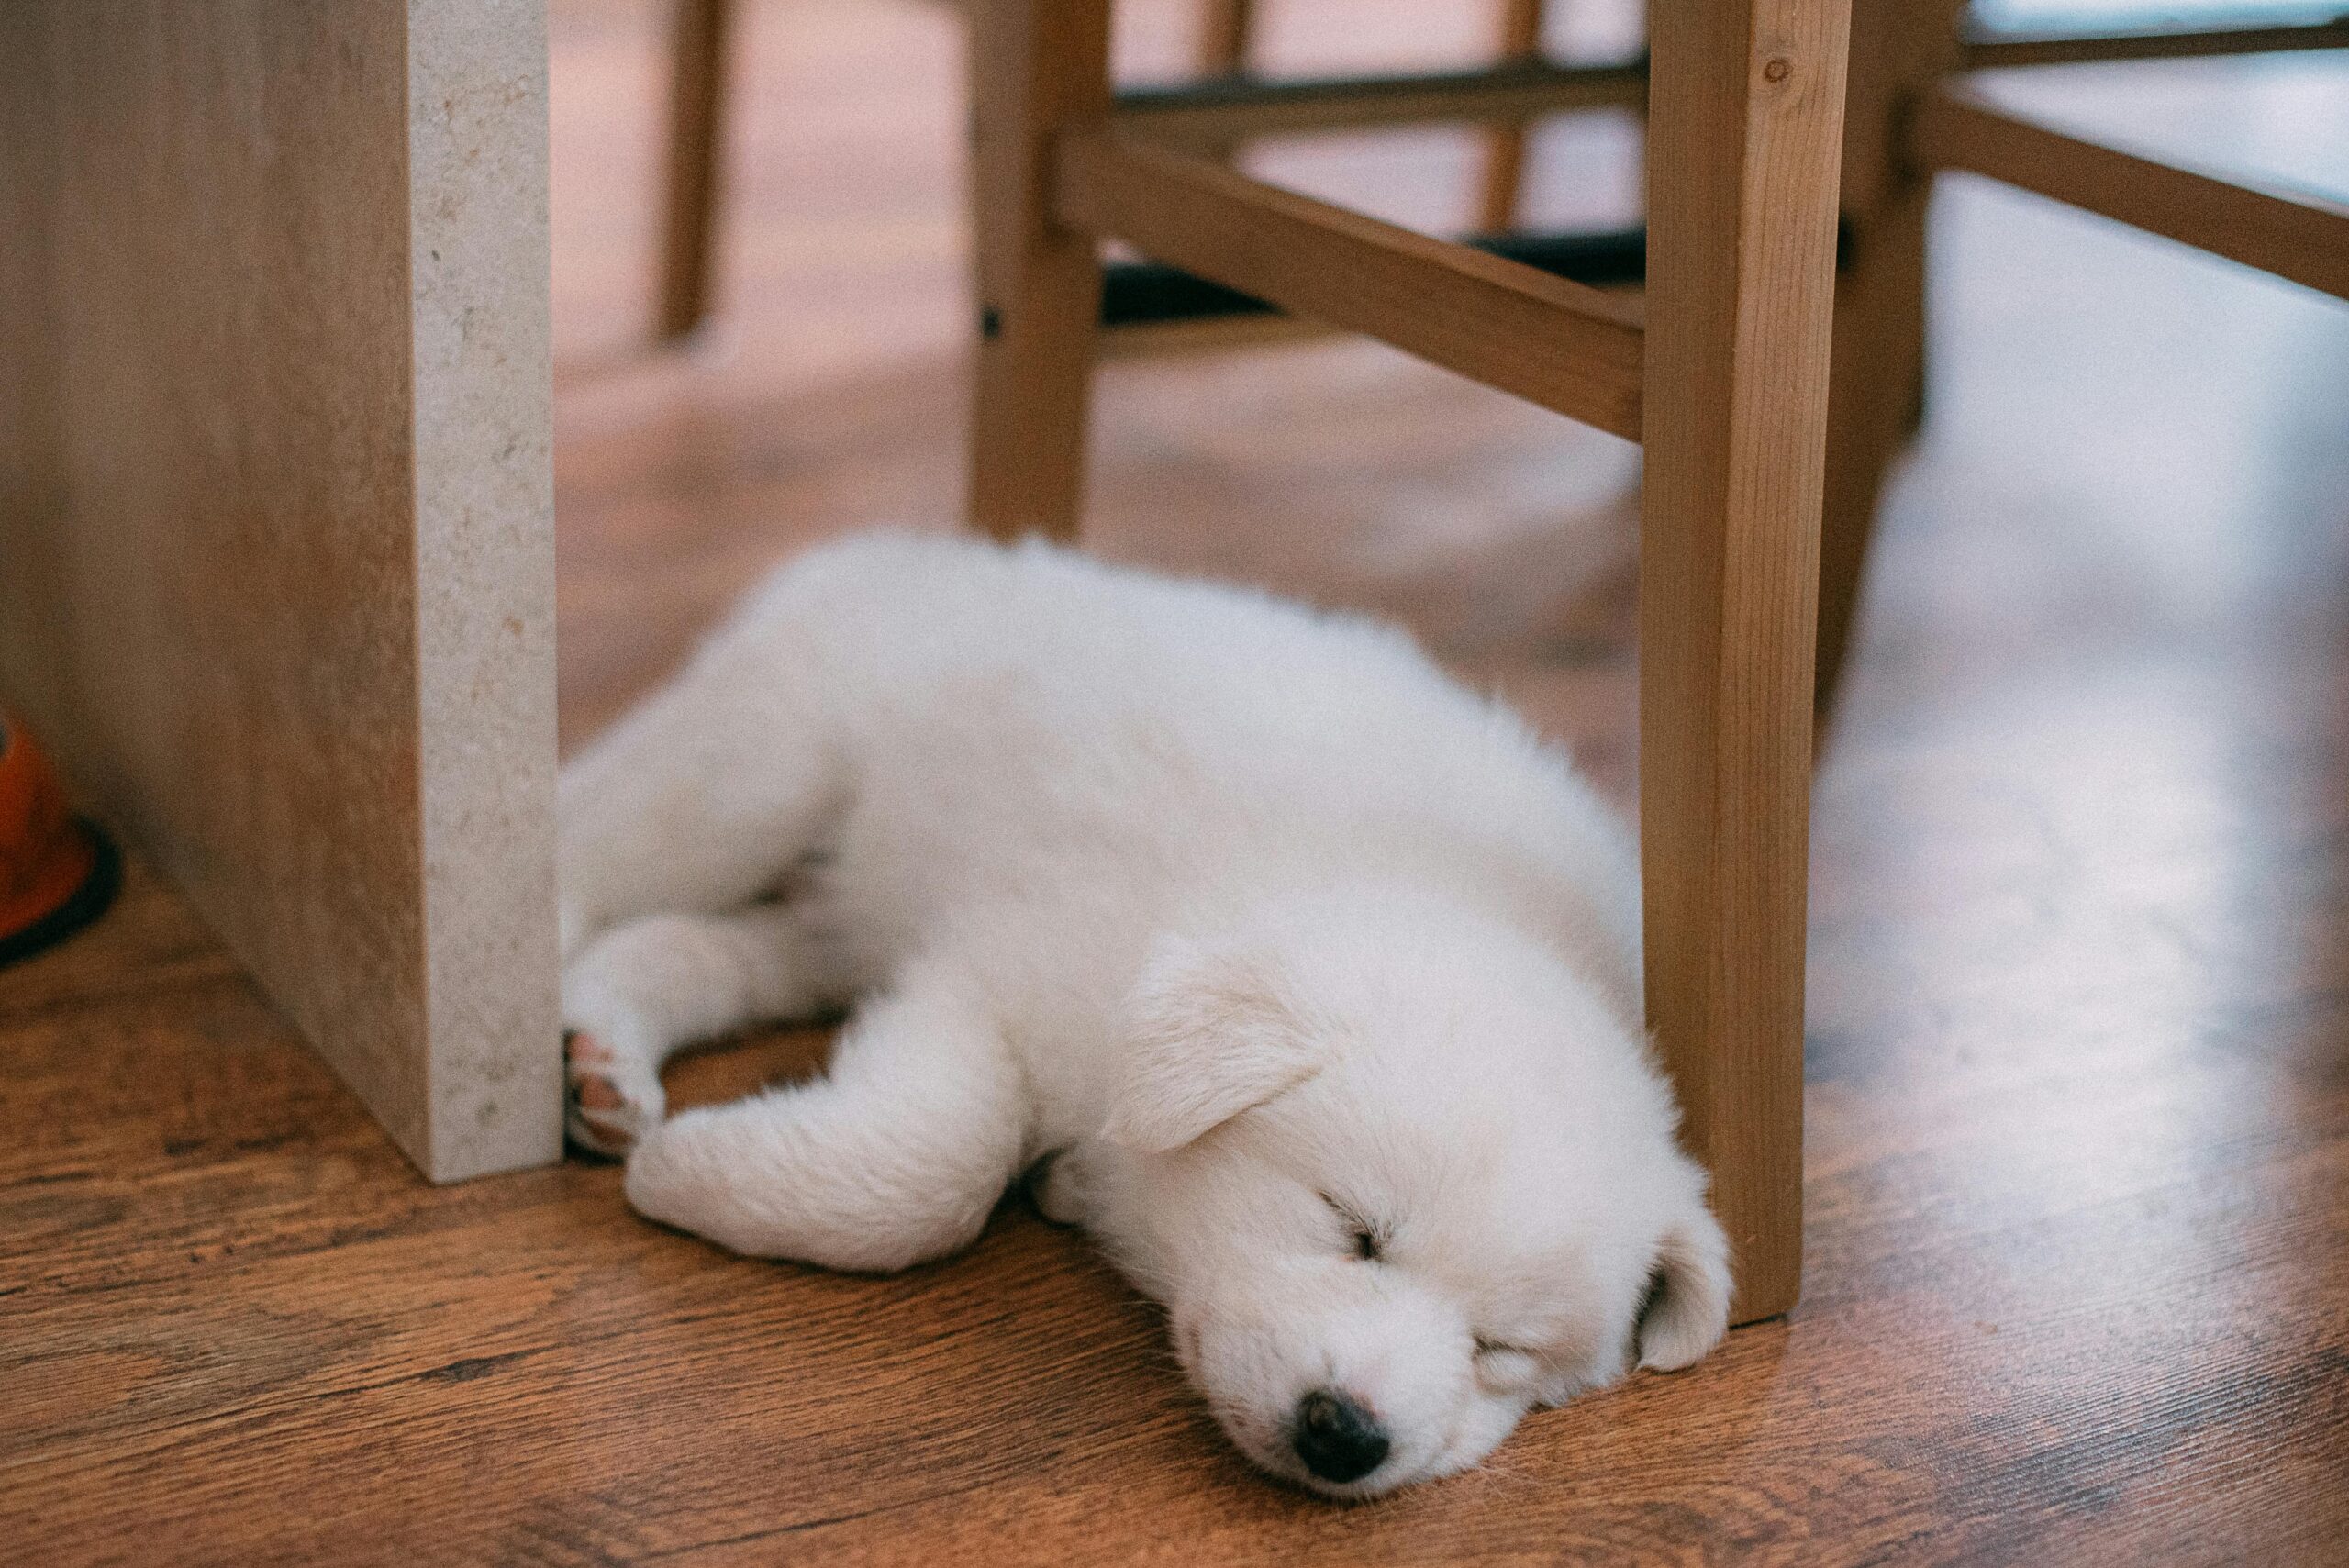 A puppy laying on wooden floors